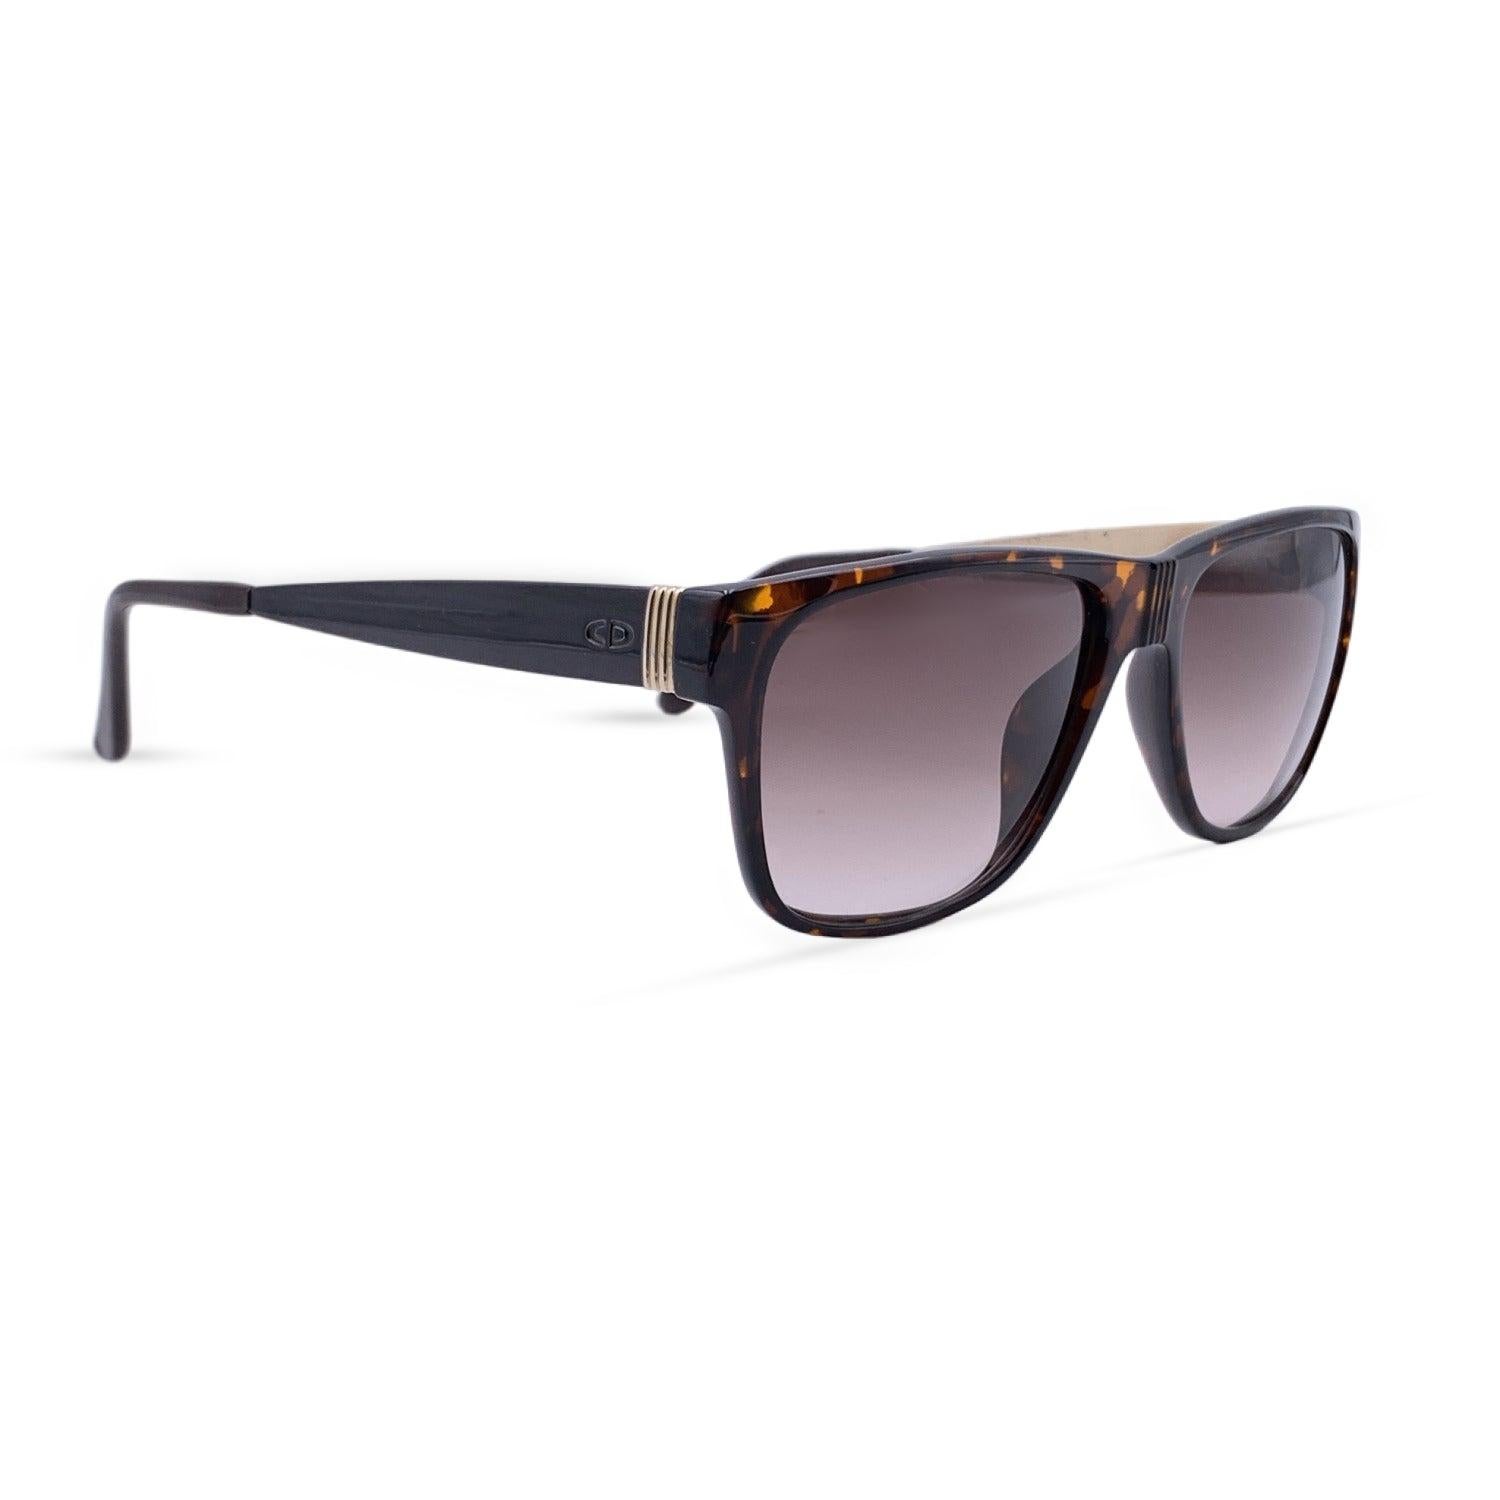 Vintage Christian Dior Monsieur Unisex Sunglasses, Mod. 2406 10 Size 57/16 140mm. Brown acetate frame, with gold metal finish on the sides. 100% Total UVA/UVB protection brown gradient lenses. CD logos on the side of the temples. Details MATERIAL: